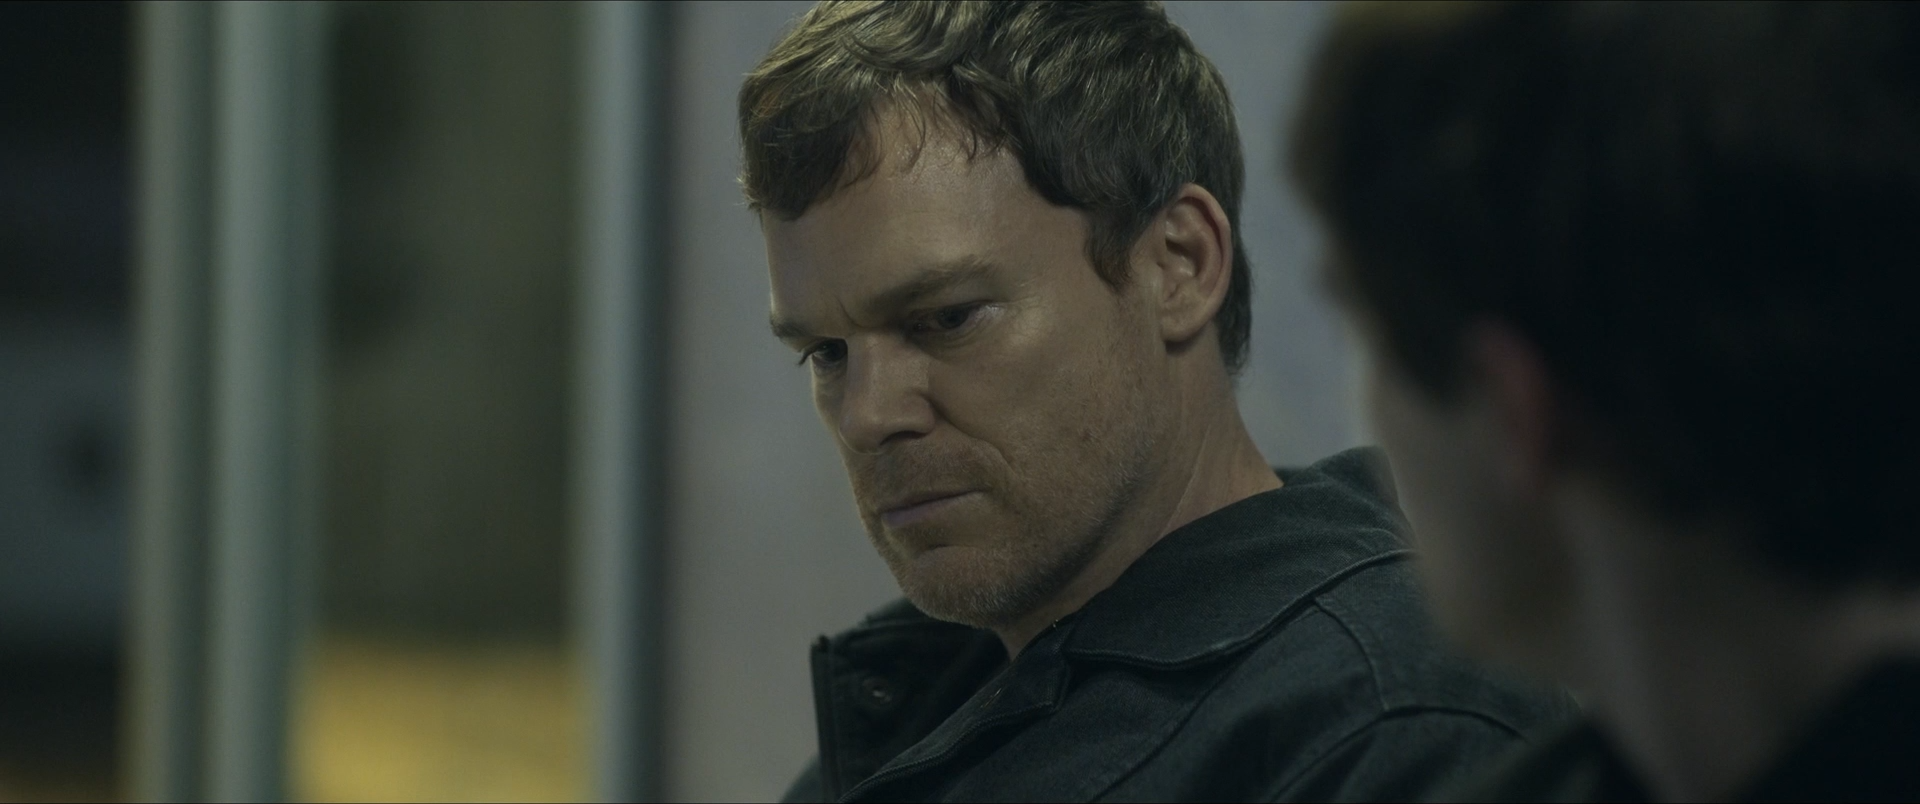 1080p_UHD2 Dexter.New.Blood.S01E01_ideafilm_Spin City33.mp4_snapshot_54.44.572.png